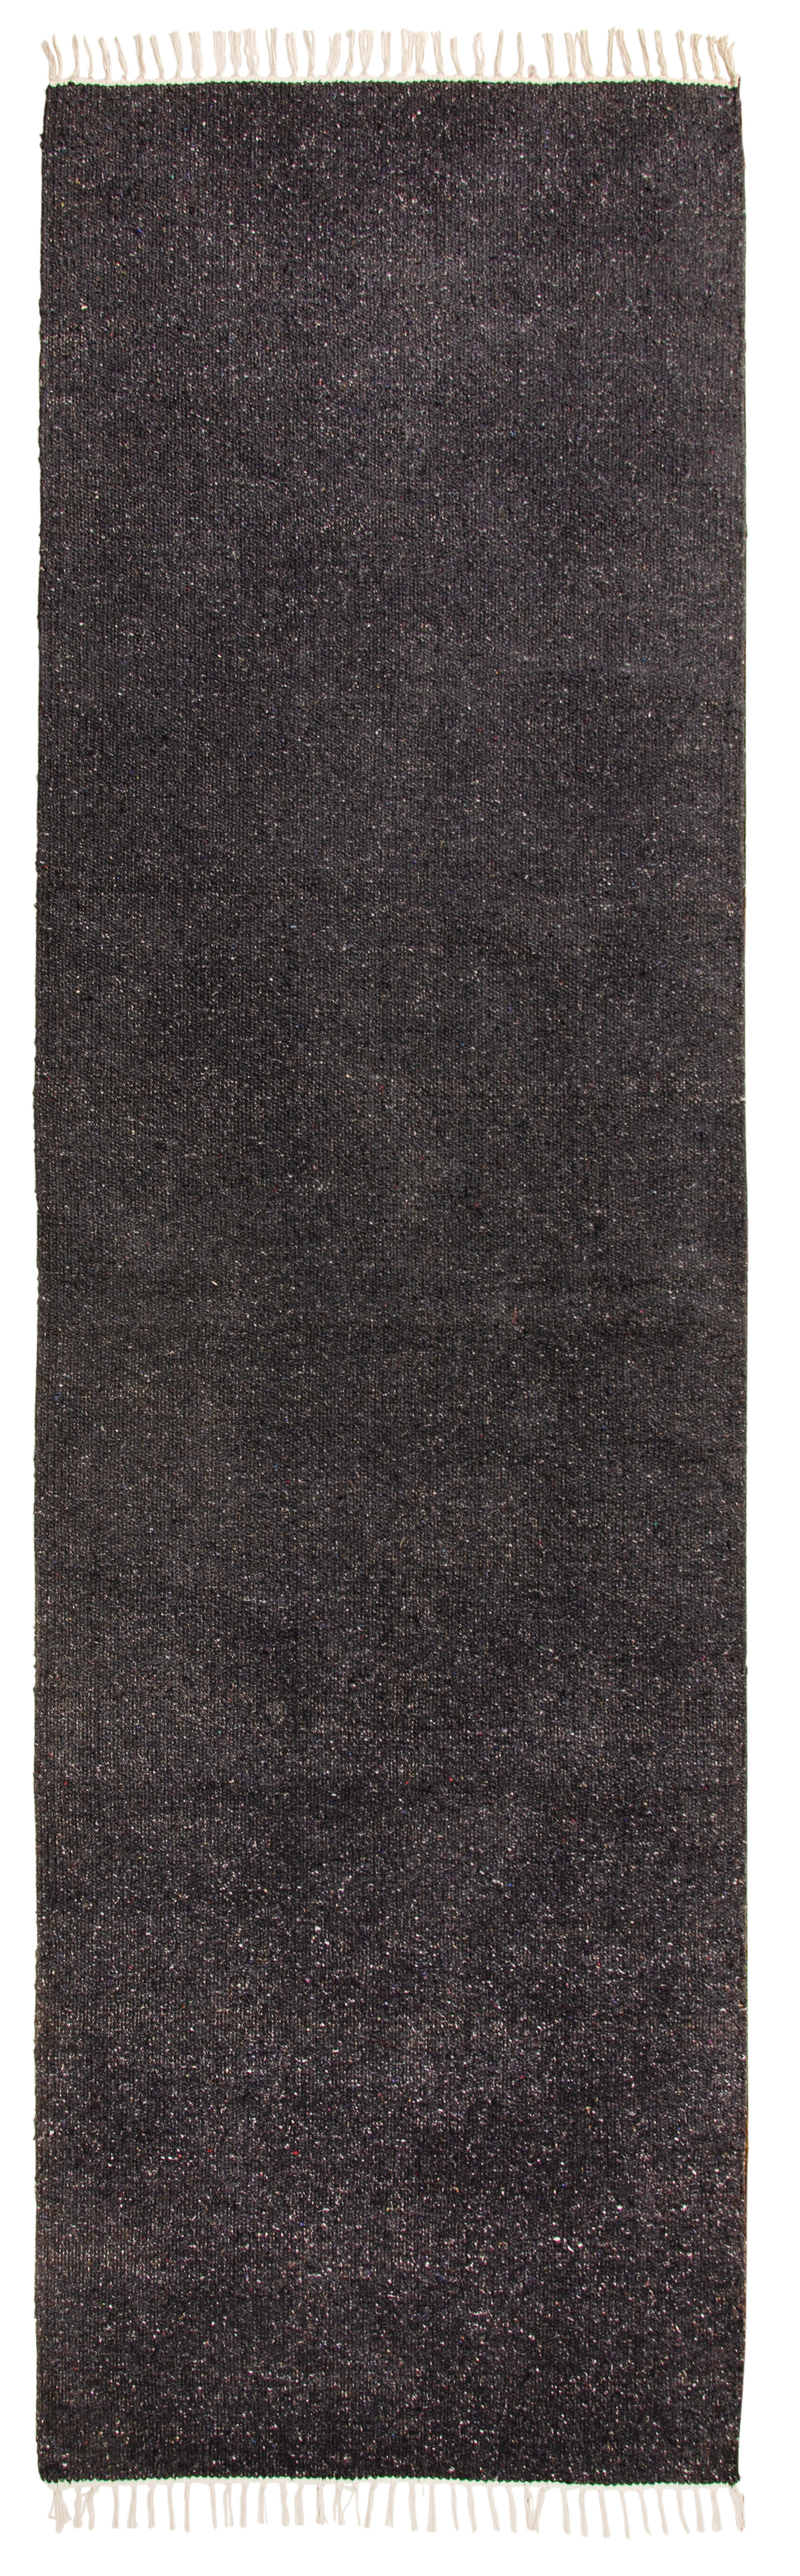 Plain Coloured Recycled Cotton Rug 75 x 240cm in 2 Colours Fair Trade GoodWeave